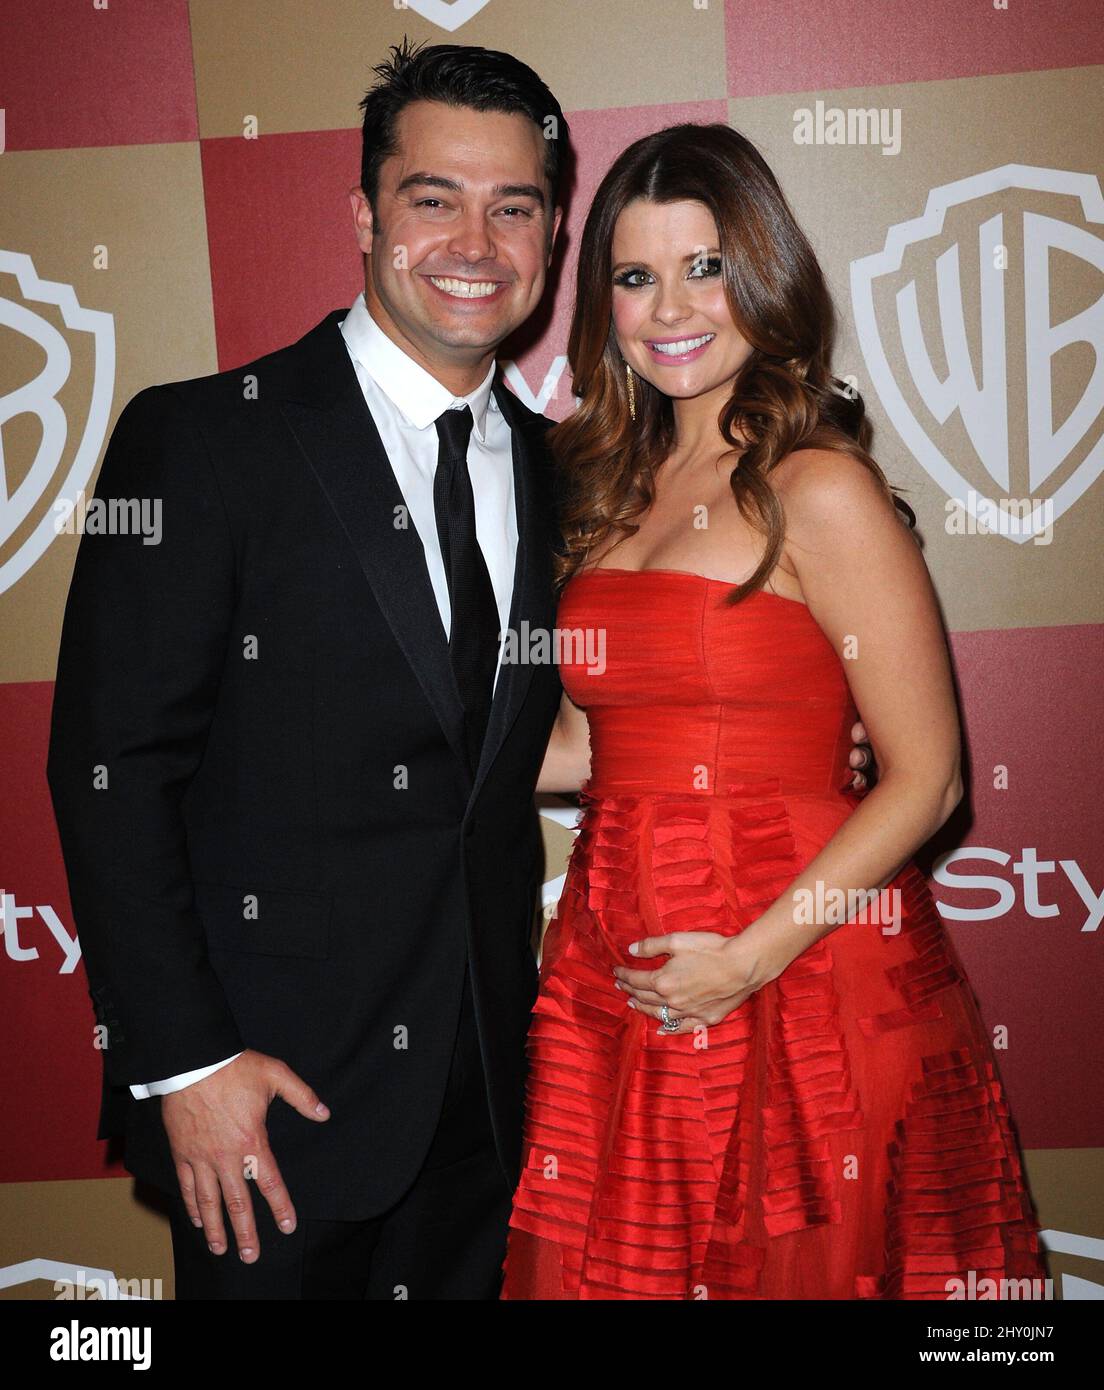 Nick Swisher and Joanna Garcia attending the 14th Annual Warner Bros. and InStyle Golden Globe Awards After Party held at the Beverly Hilton Hotel in Los Angeles, USA. Stock Photo